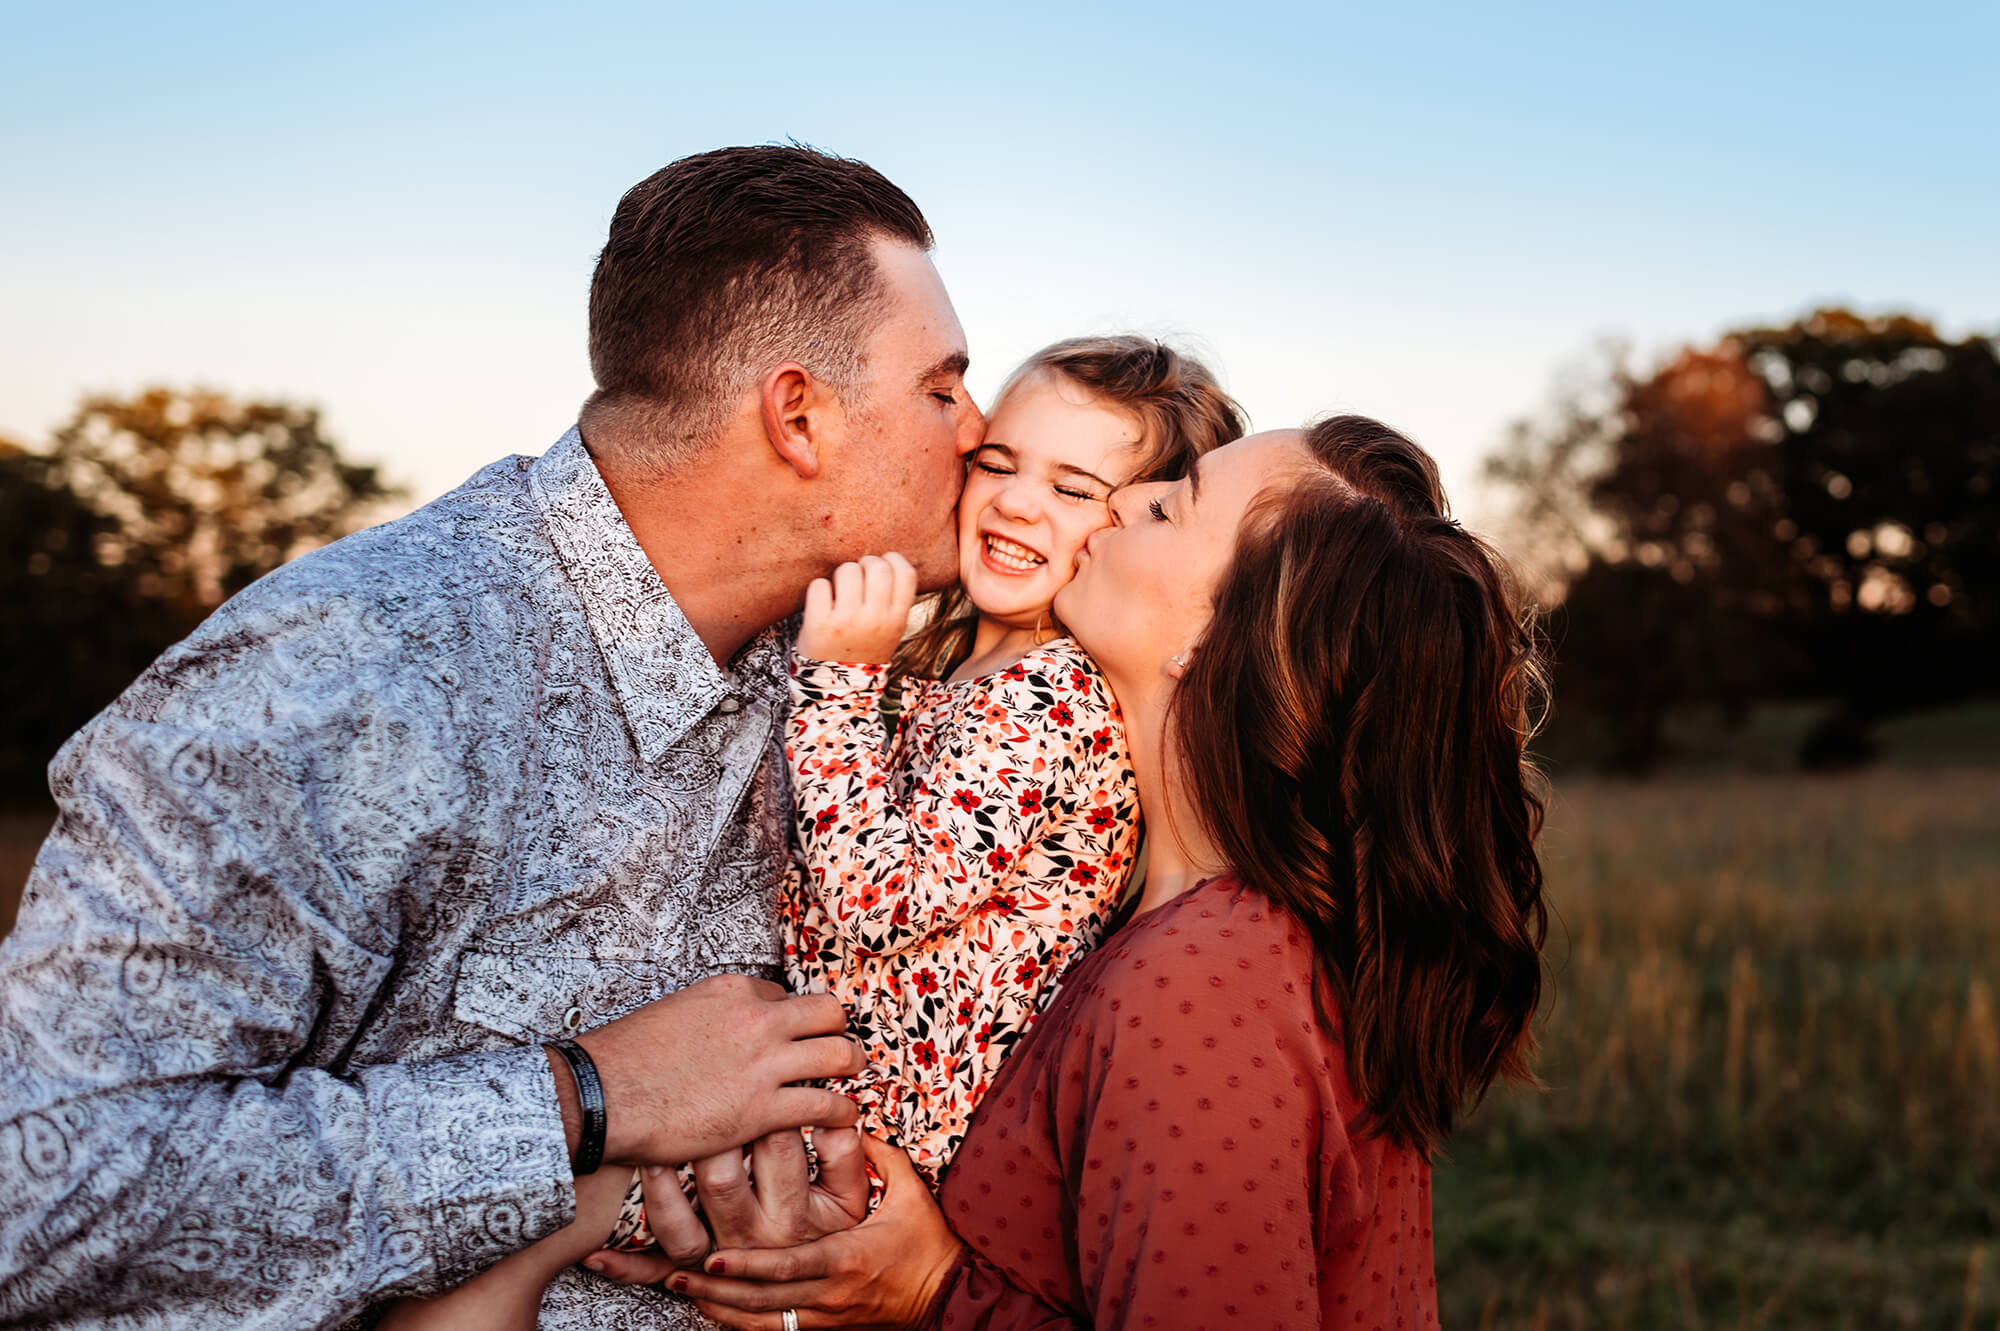 Springfield MO family photographer captures toddler being kissed by dad and mom in open field at sunset